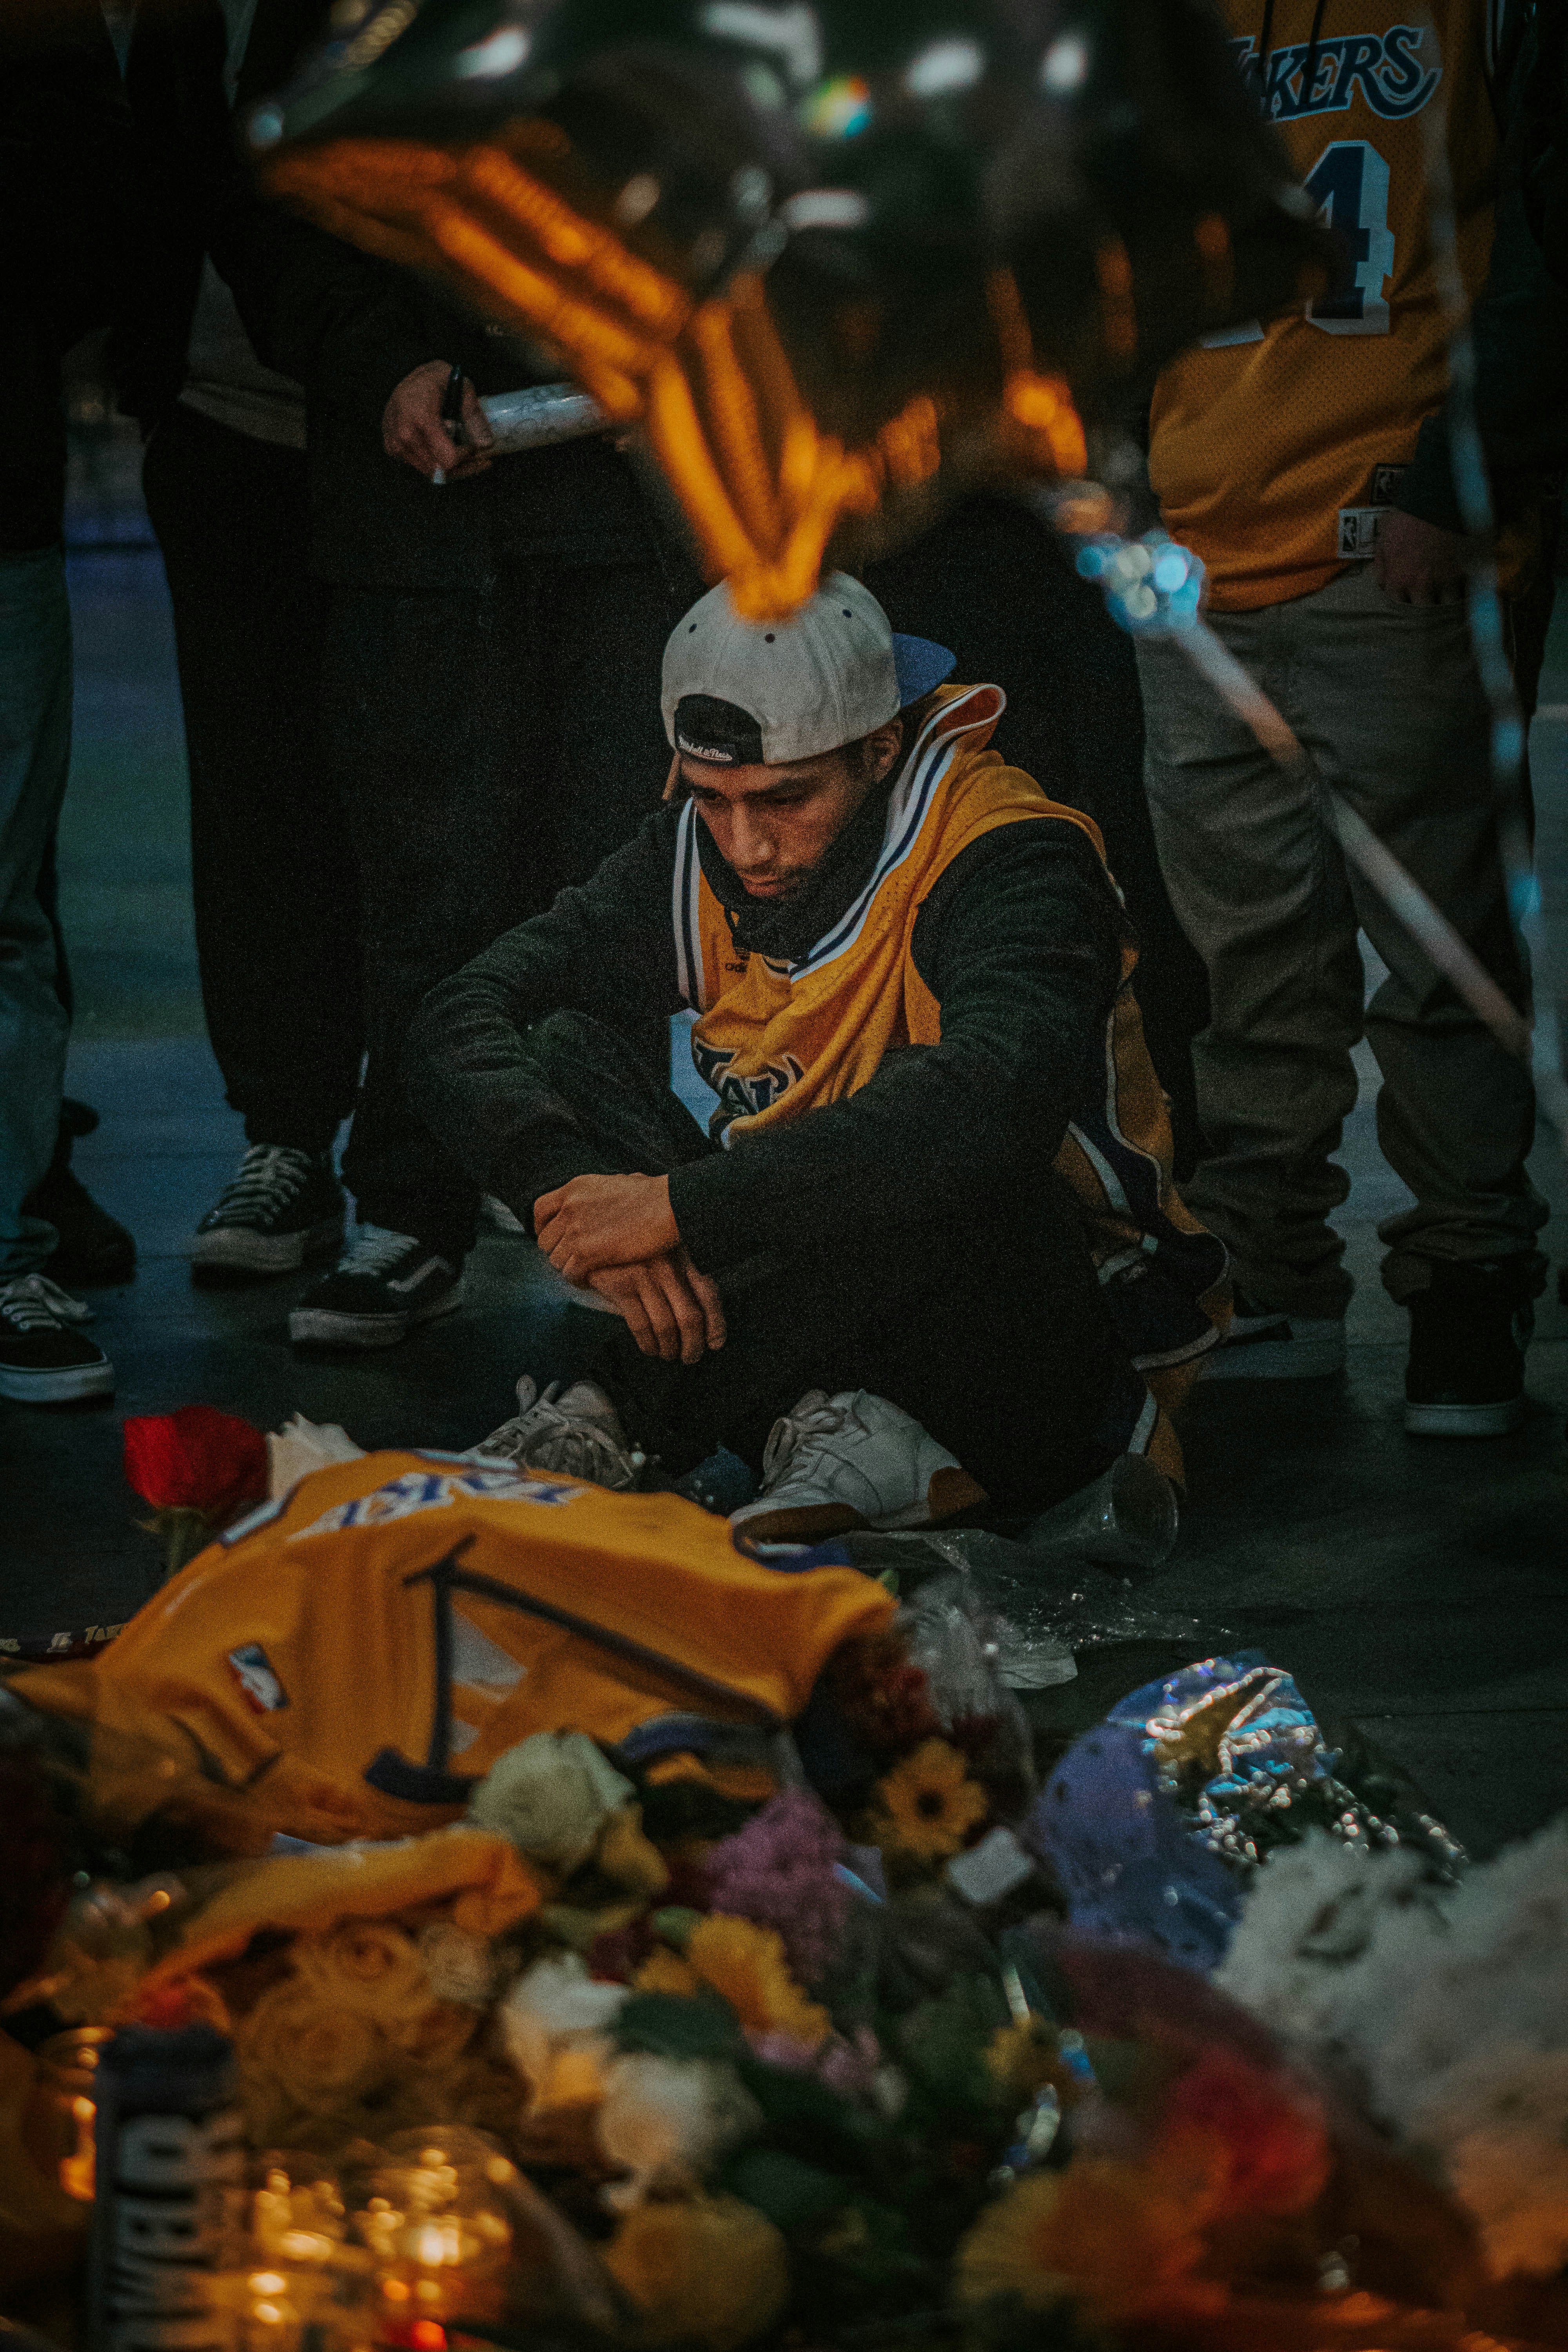 Fan's mourn Kobe Bryant's death at a vigil at Staples Center on January 26th, 2020.